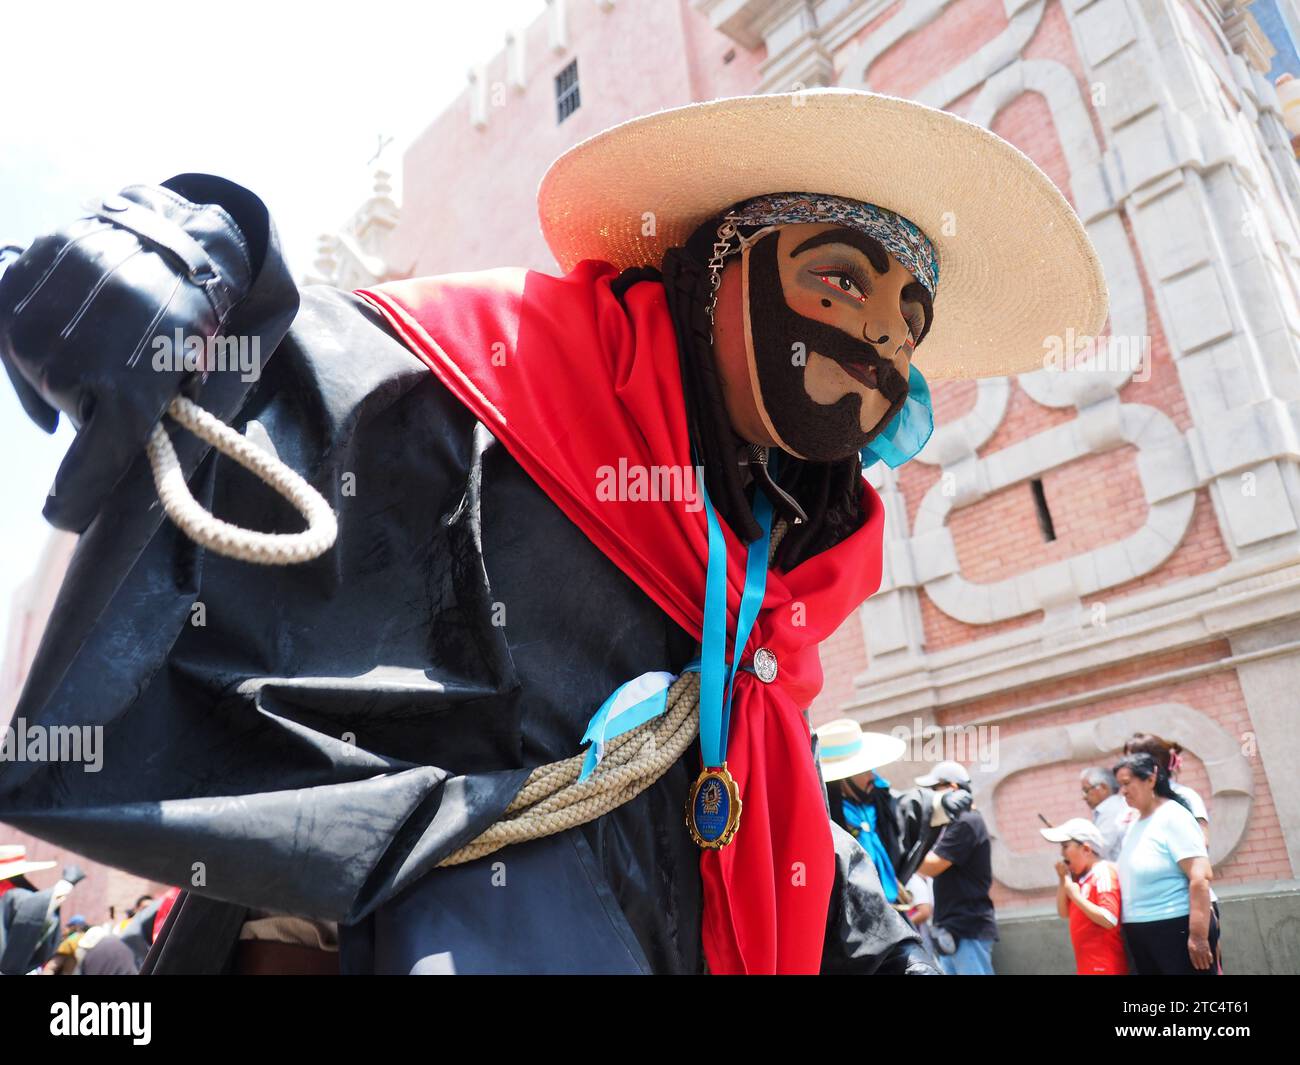 Man with mask and whip from an indigenous Peruvian folk dance group performing the 'Danza de los Arrieros' (Dance of the Muleteers) through the streets of the historic center of Lima as part of the Municipality of Lima program to disseminate the Andean cultural heritage. Stock Photo